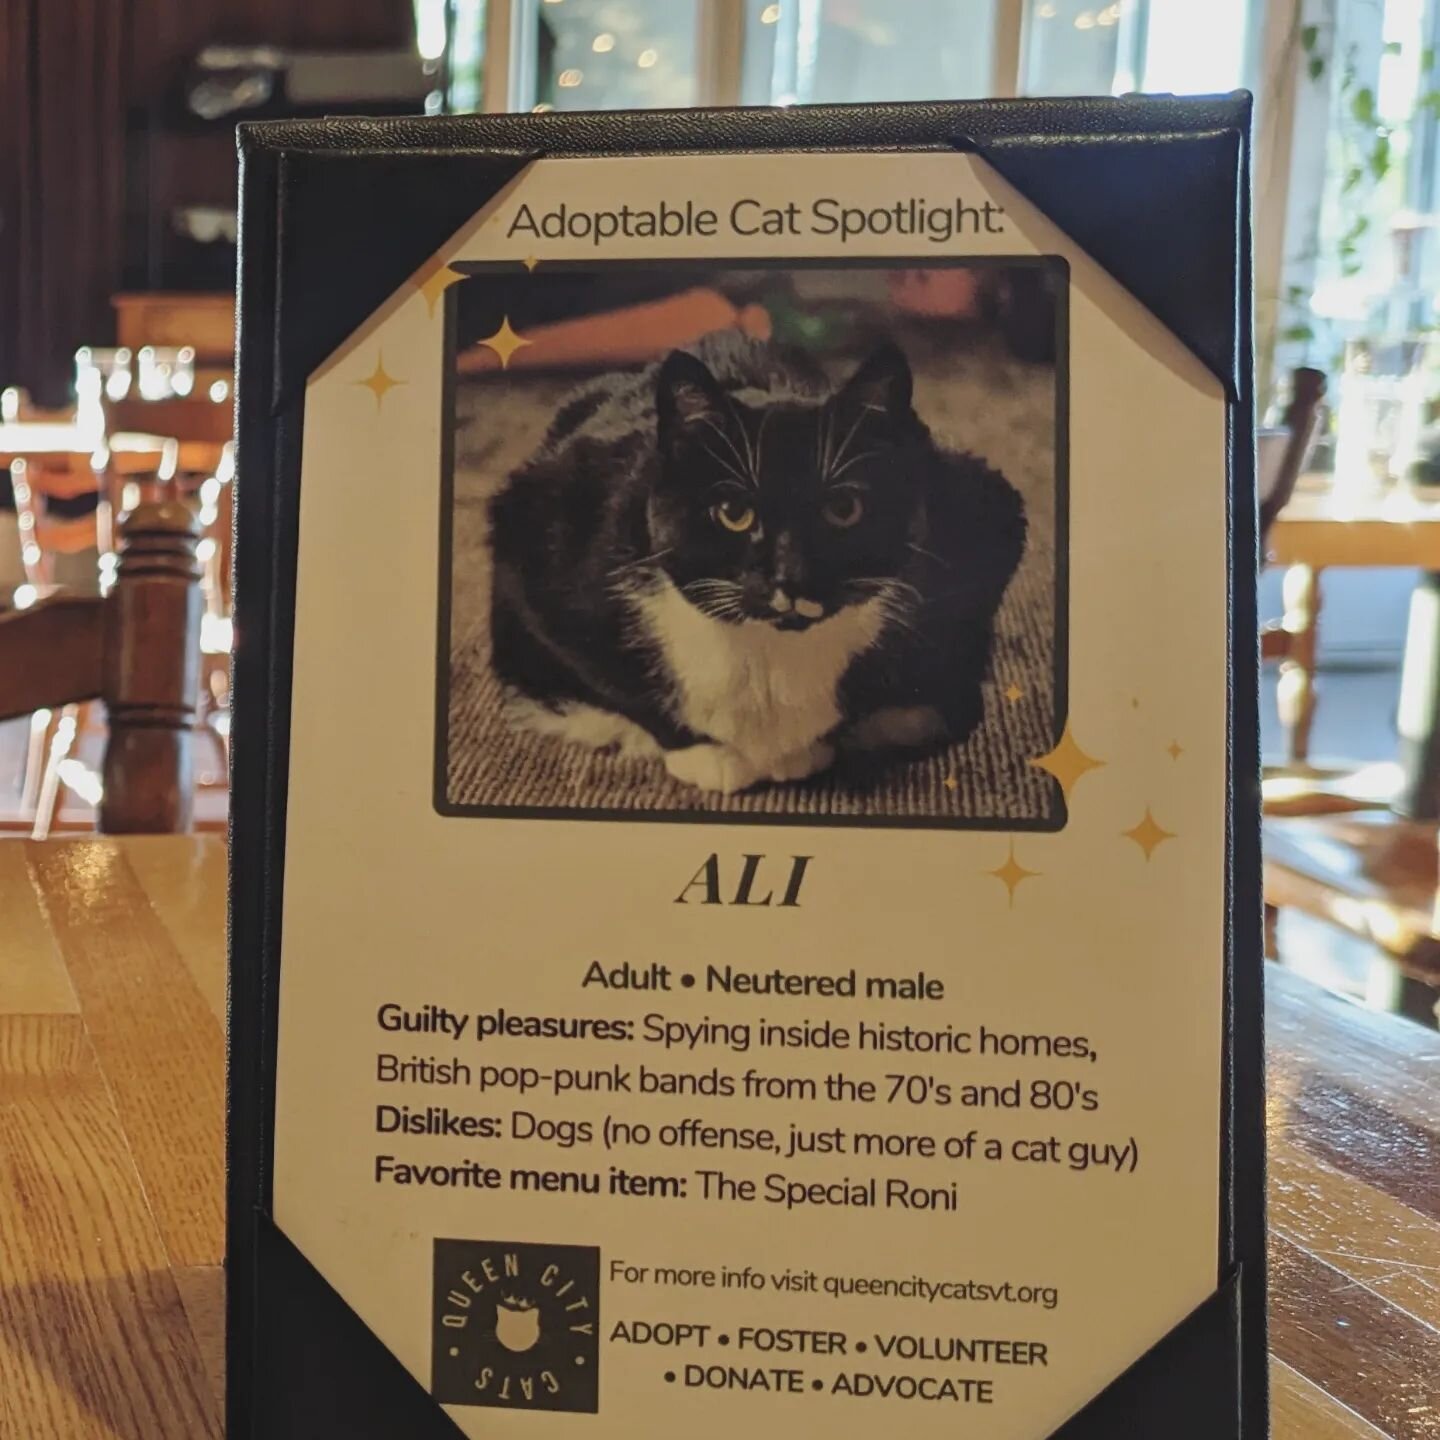 When the table tents at your favorite restaurant aren't being used and you need more eyes on the sweetest foster cats in the Northeast, this is what happens. Thank you, La Boca Wood Fired Pizzeria! Y'all have been nothing but supportive since day one